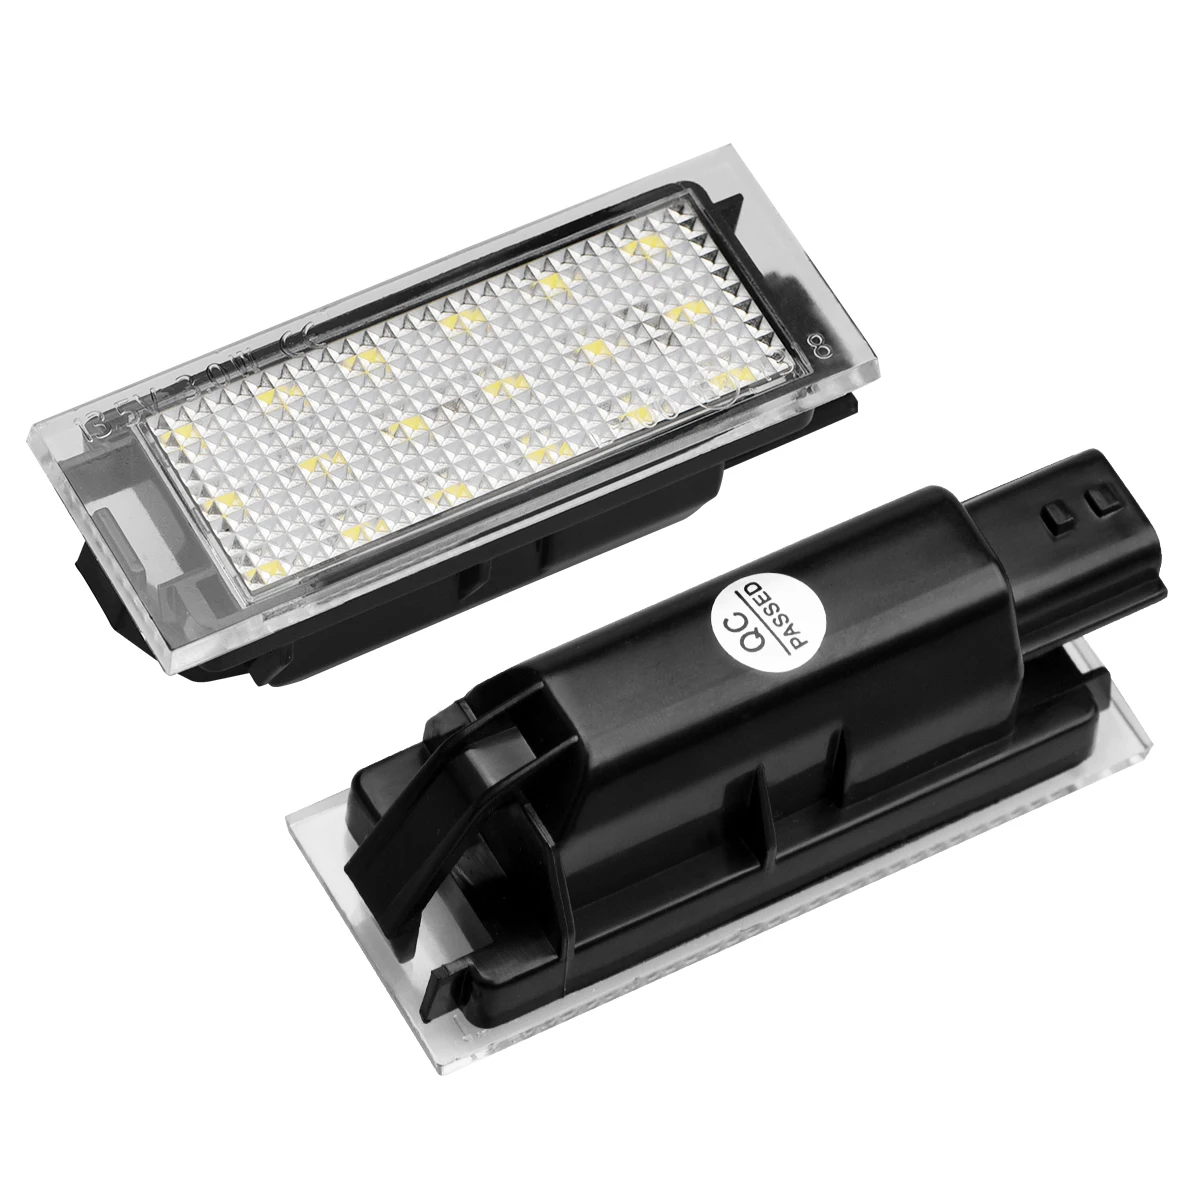 2x LED License Number Plate Light Lamps For Renault Clio 3 4 Master 2 3 Trafic 3 Megane 2 3 4 CC Twingo 2 3 Kangoo Espace 5 Wind